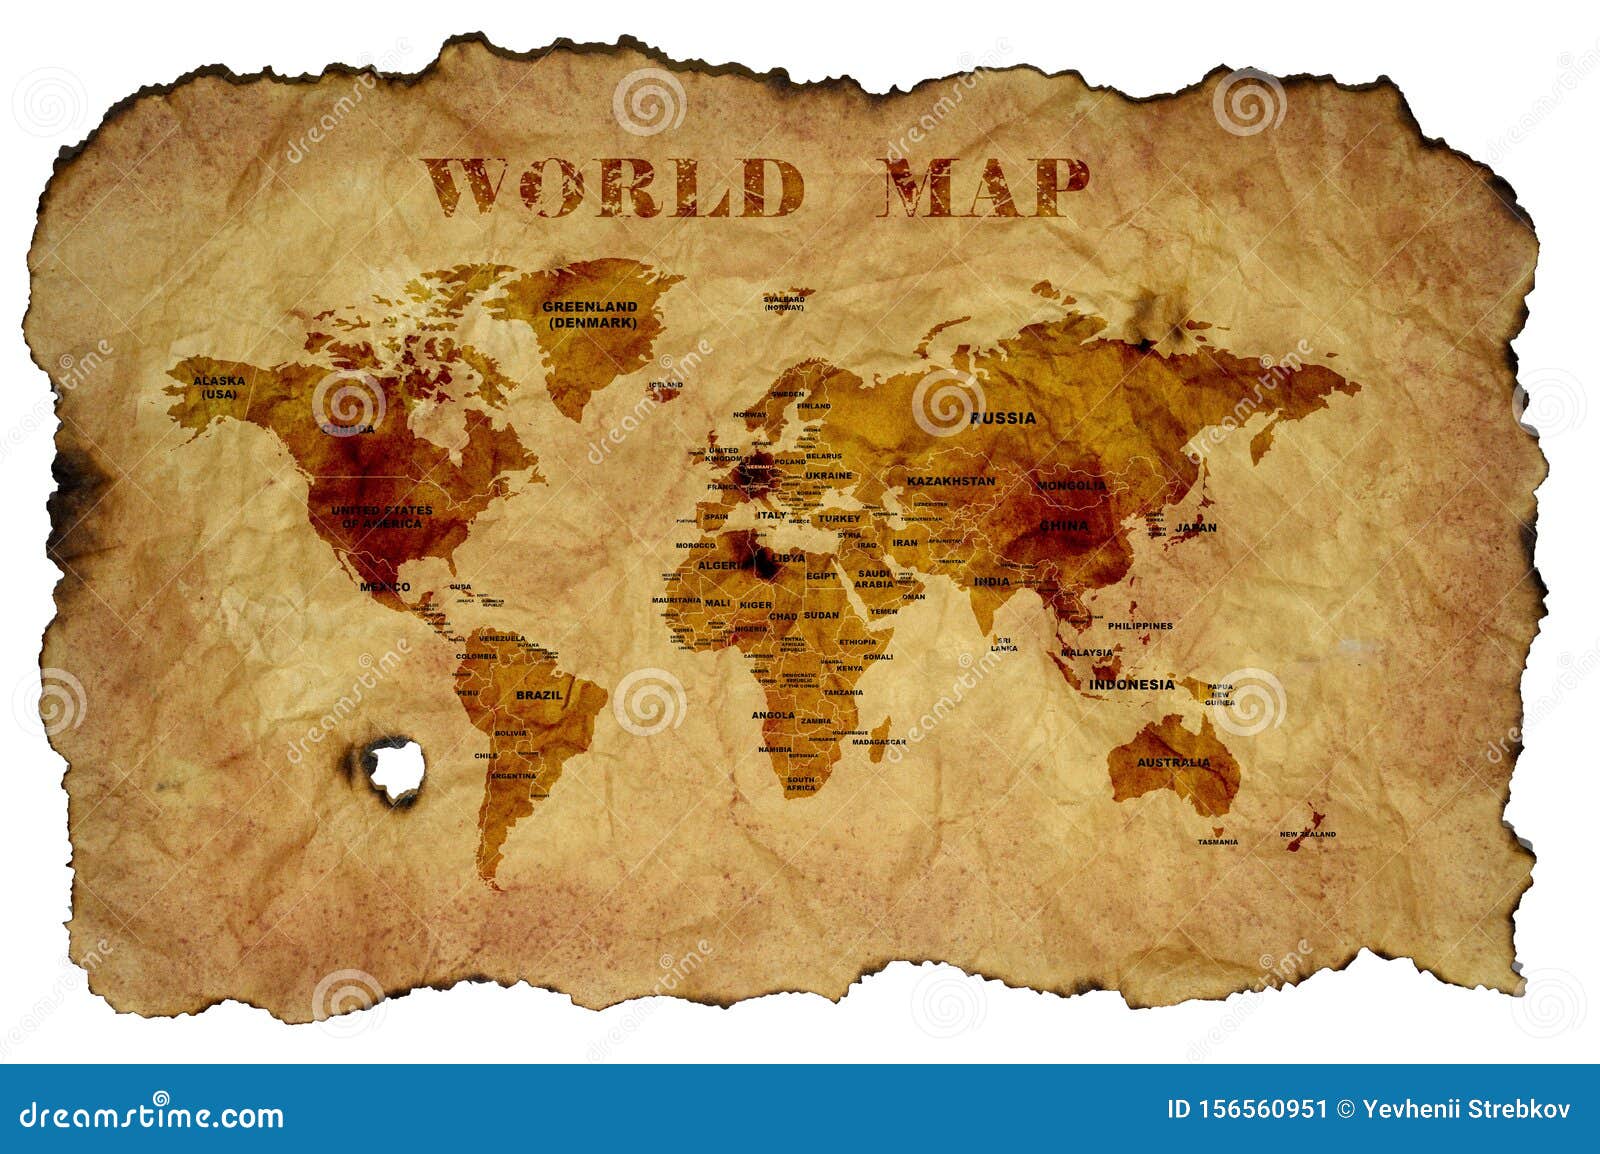 World Map on Old Parchment with Country Names Stock Image - Image ...